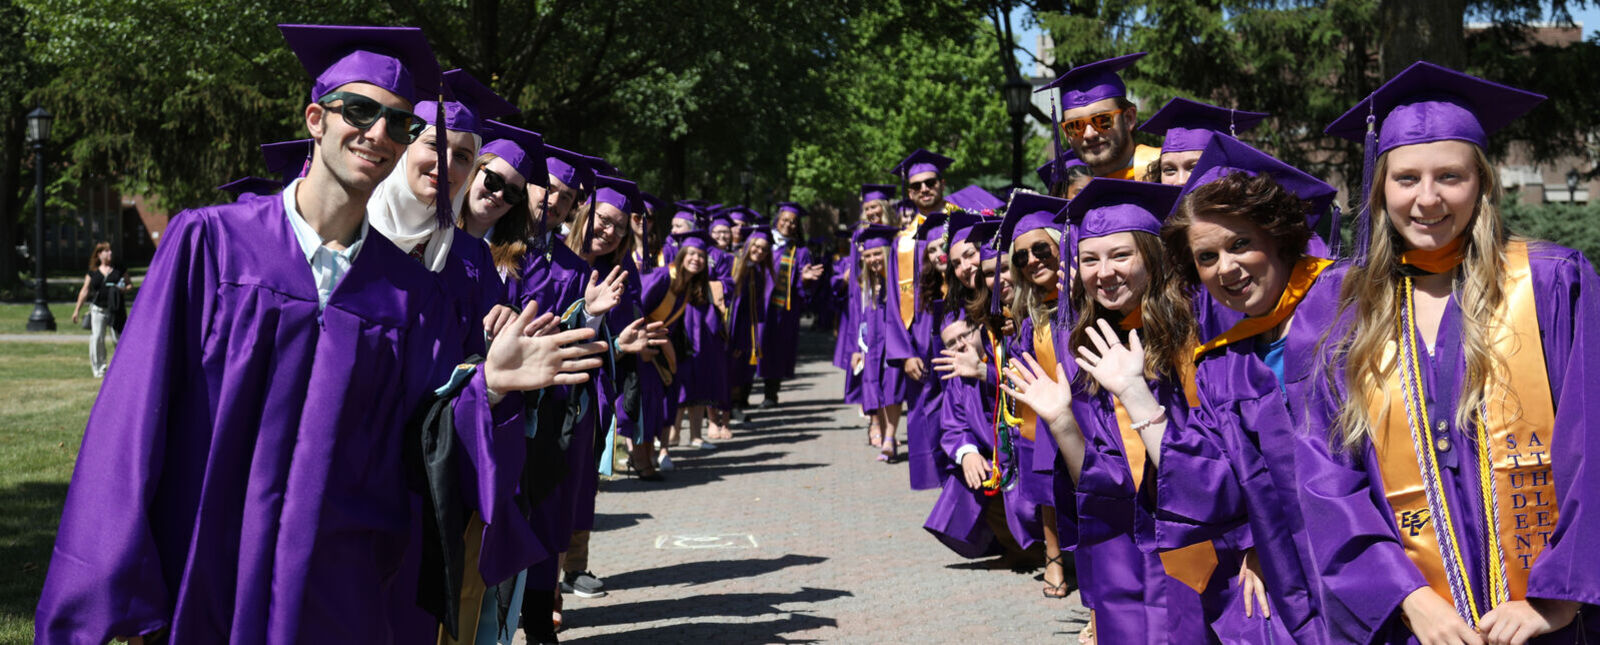 Graduates lined up on the sides of a walkway wave to the camera